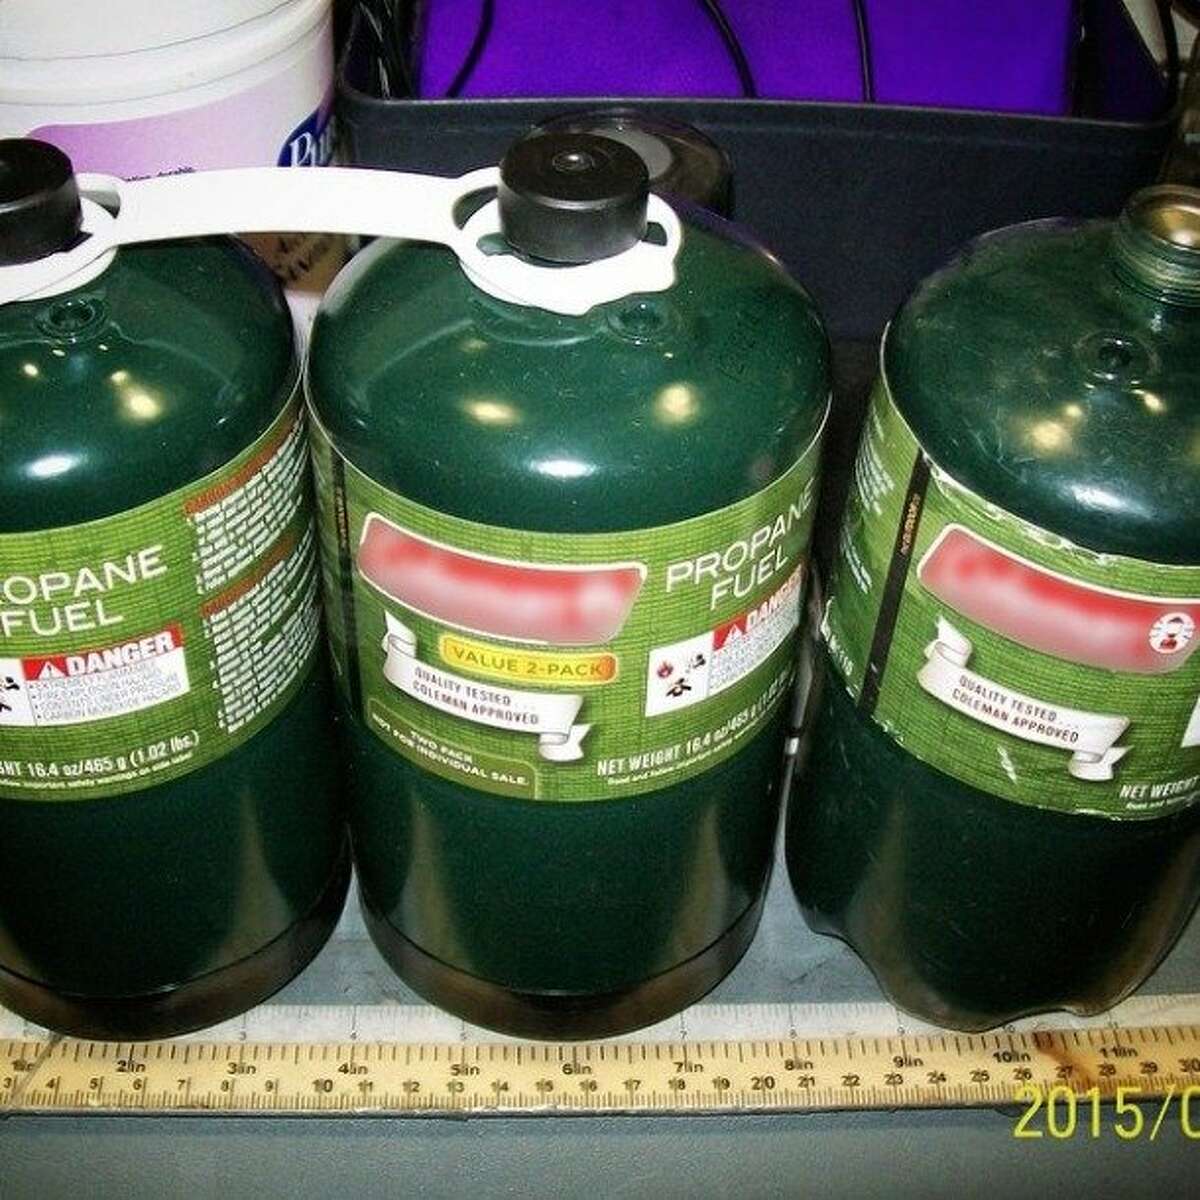 What: Three full propane tanks Where: Oakland International Airport You can't even take a tube of toothpaste on a plane. You really thought you were going to make it through with propane tanks? Hopefully, this traveller was ticketed on general principal. 